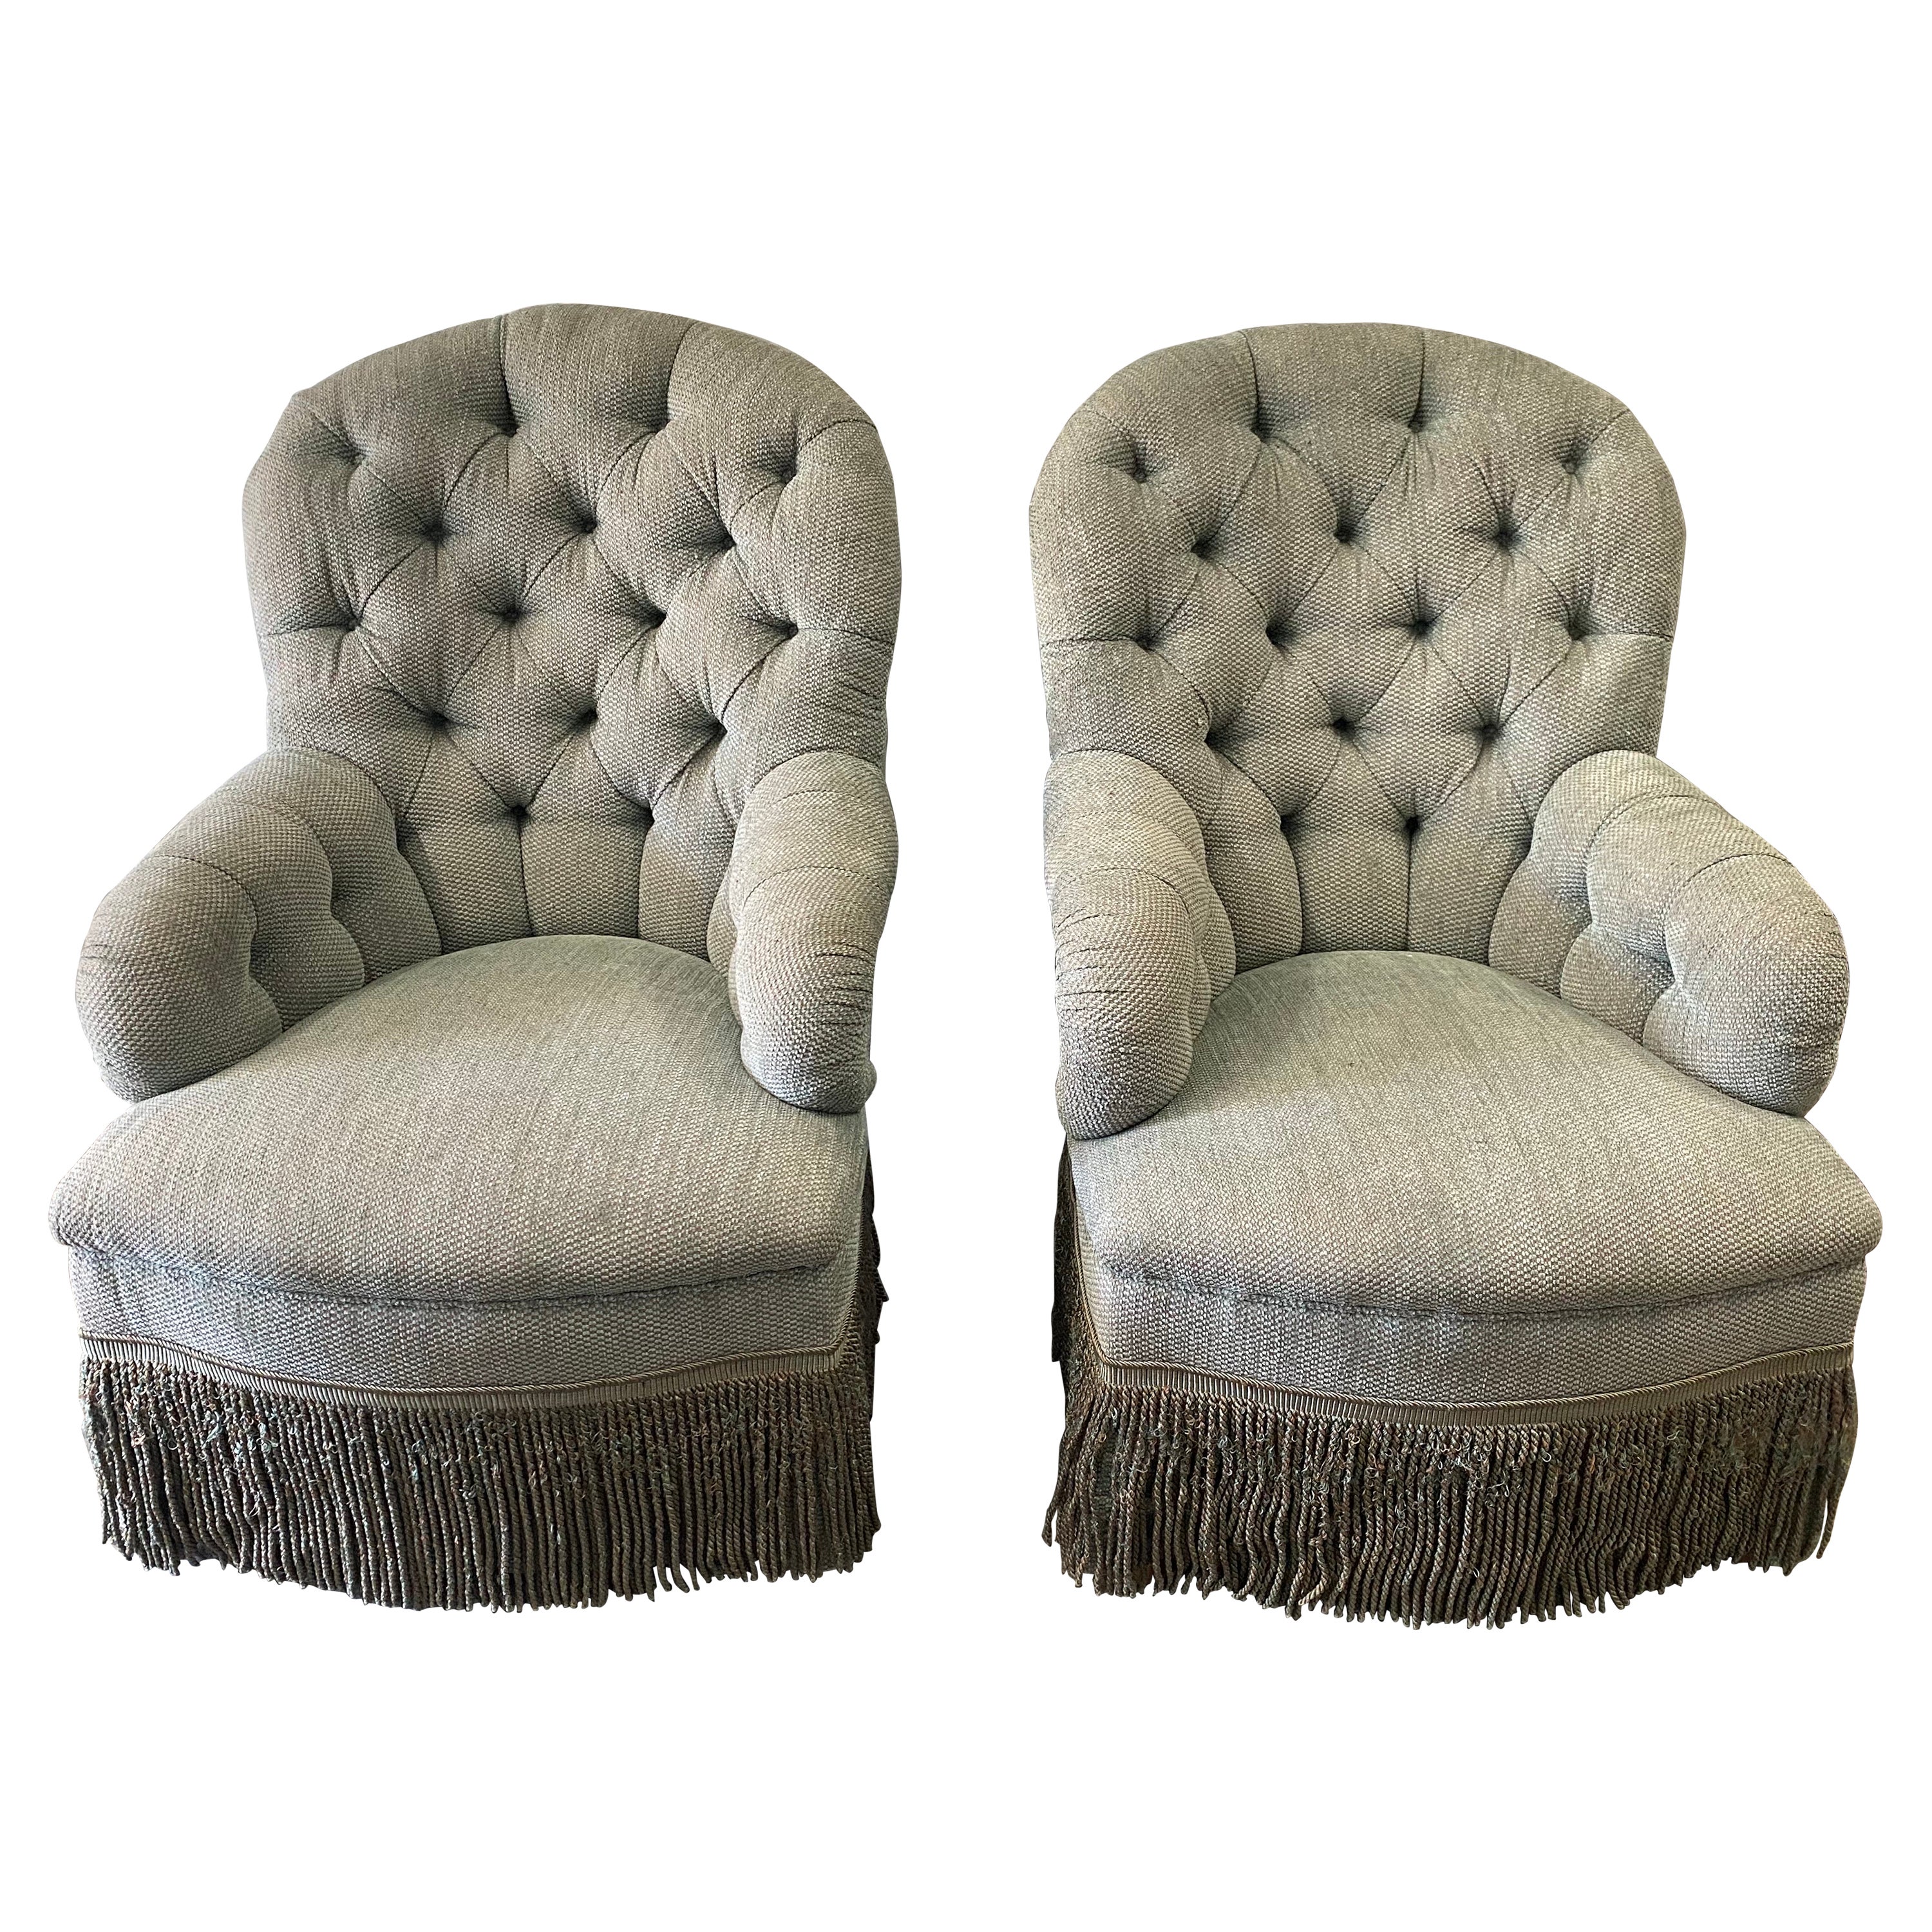 Pair of Tufted Rounded Back Armchairs Custom-Made by David Easton